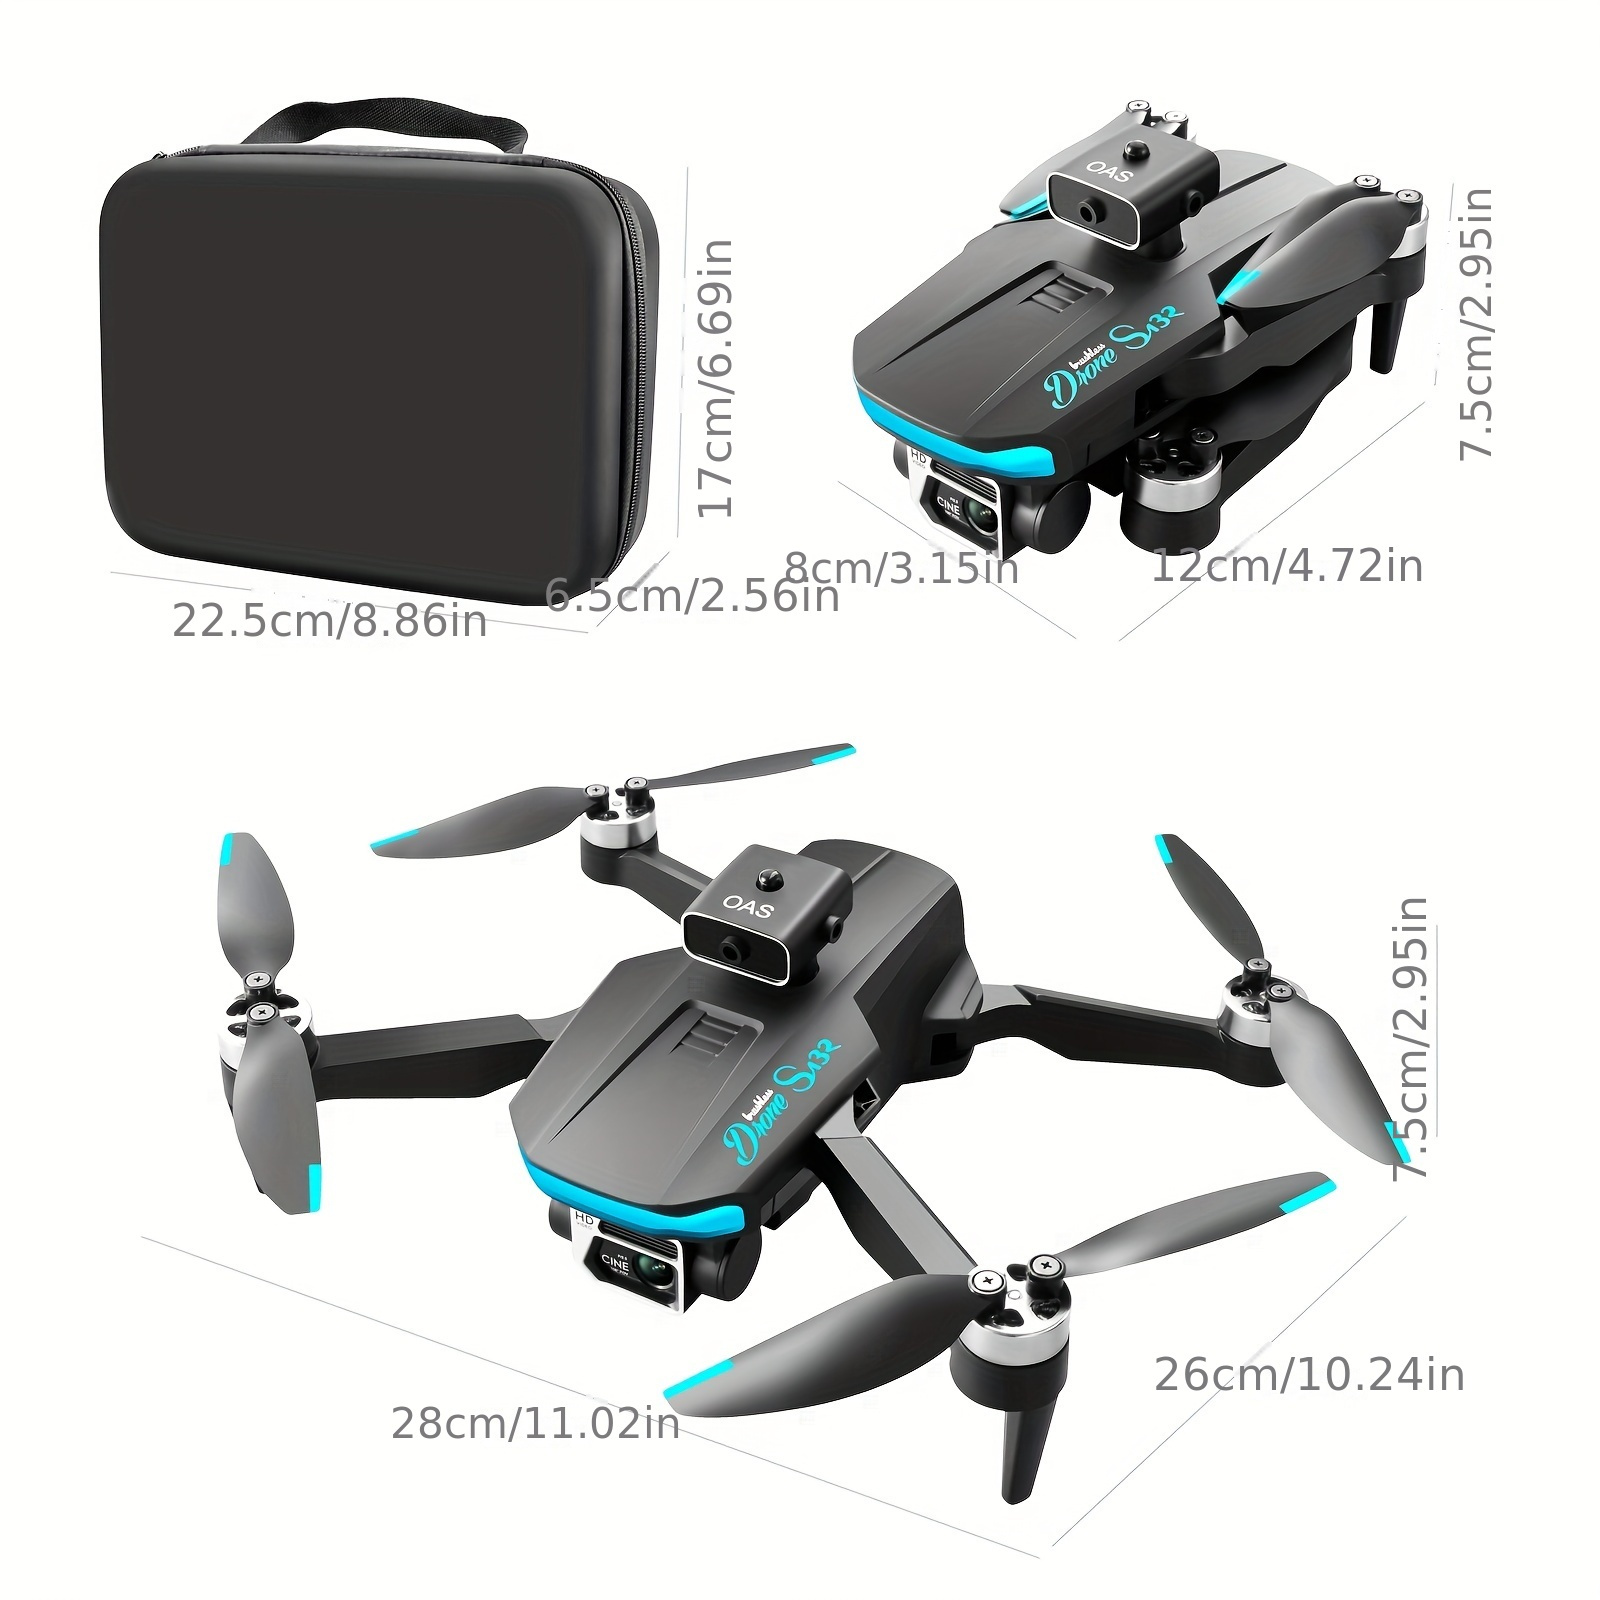 s132 drone hd camera gps global positioning optical flow fixed point hovering four sided infrared obstacle avoidance 90 electrically adjustable lens folding professional aerial photography uav details 11